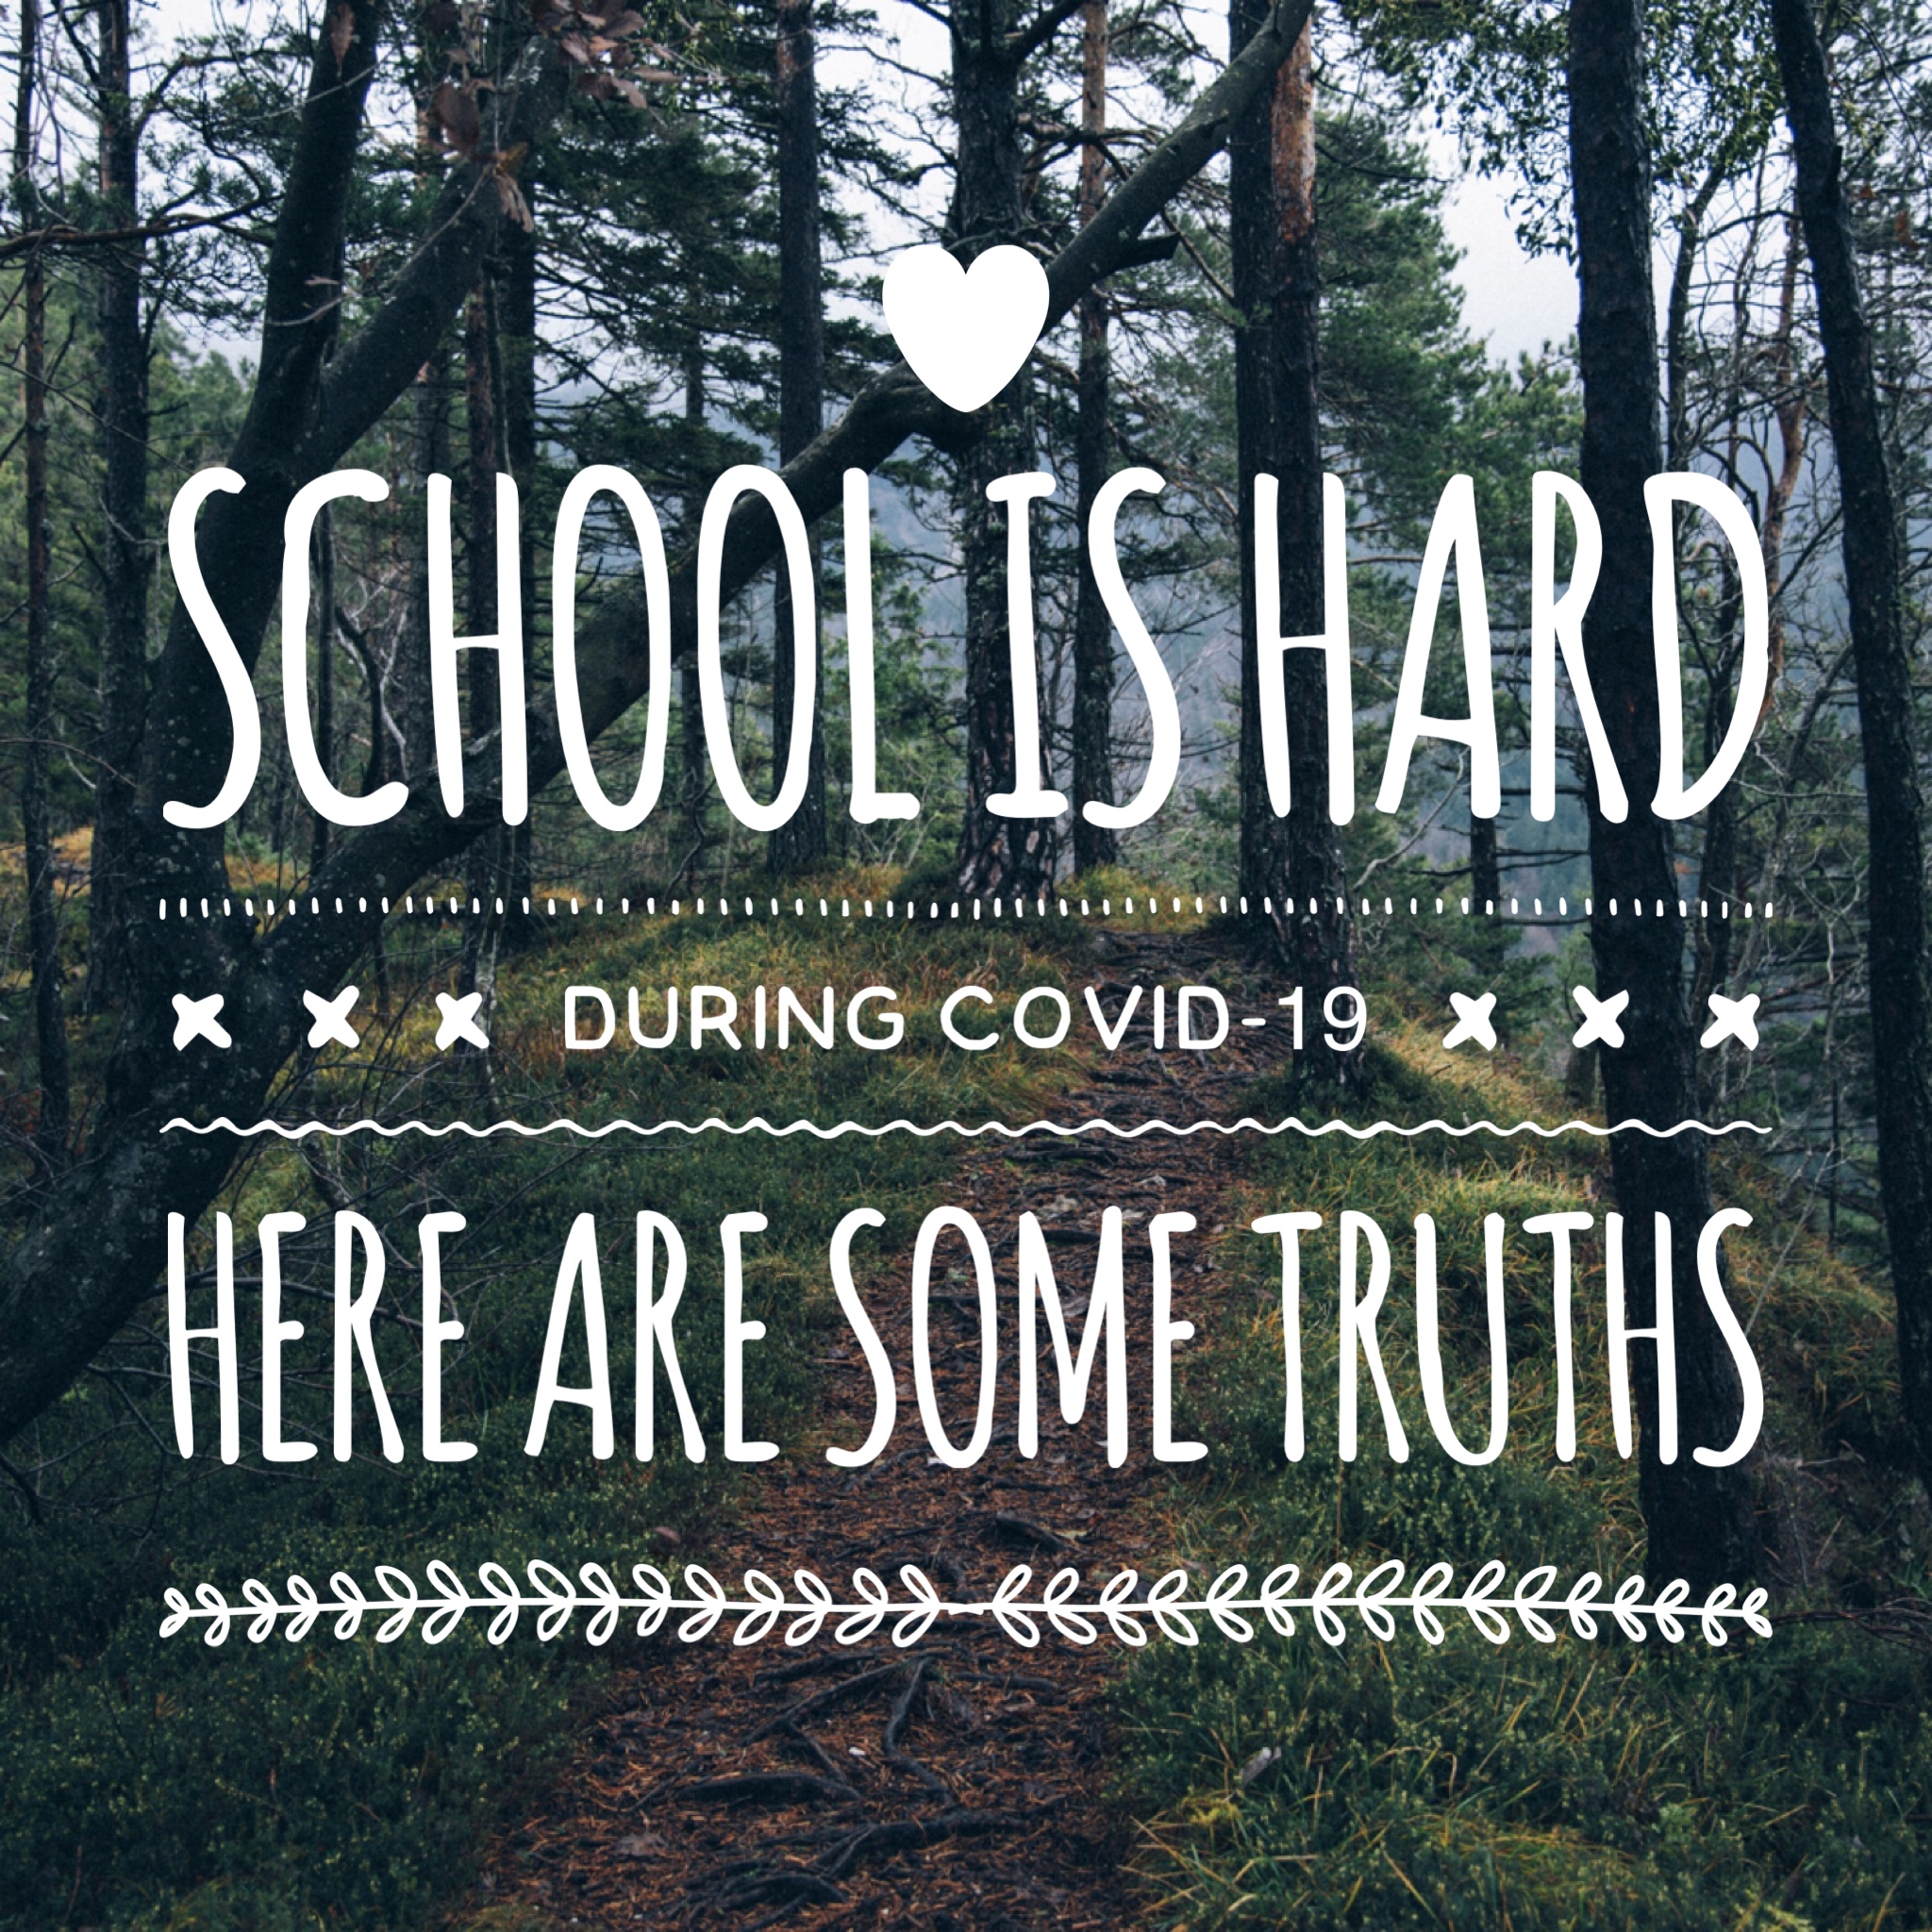 Truths for Schooling During Covid-19